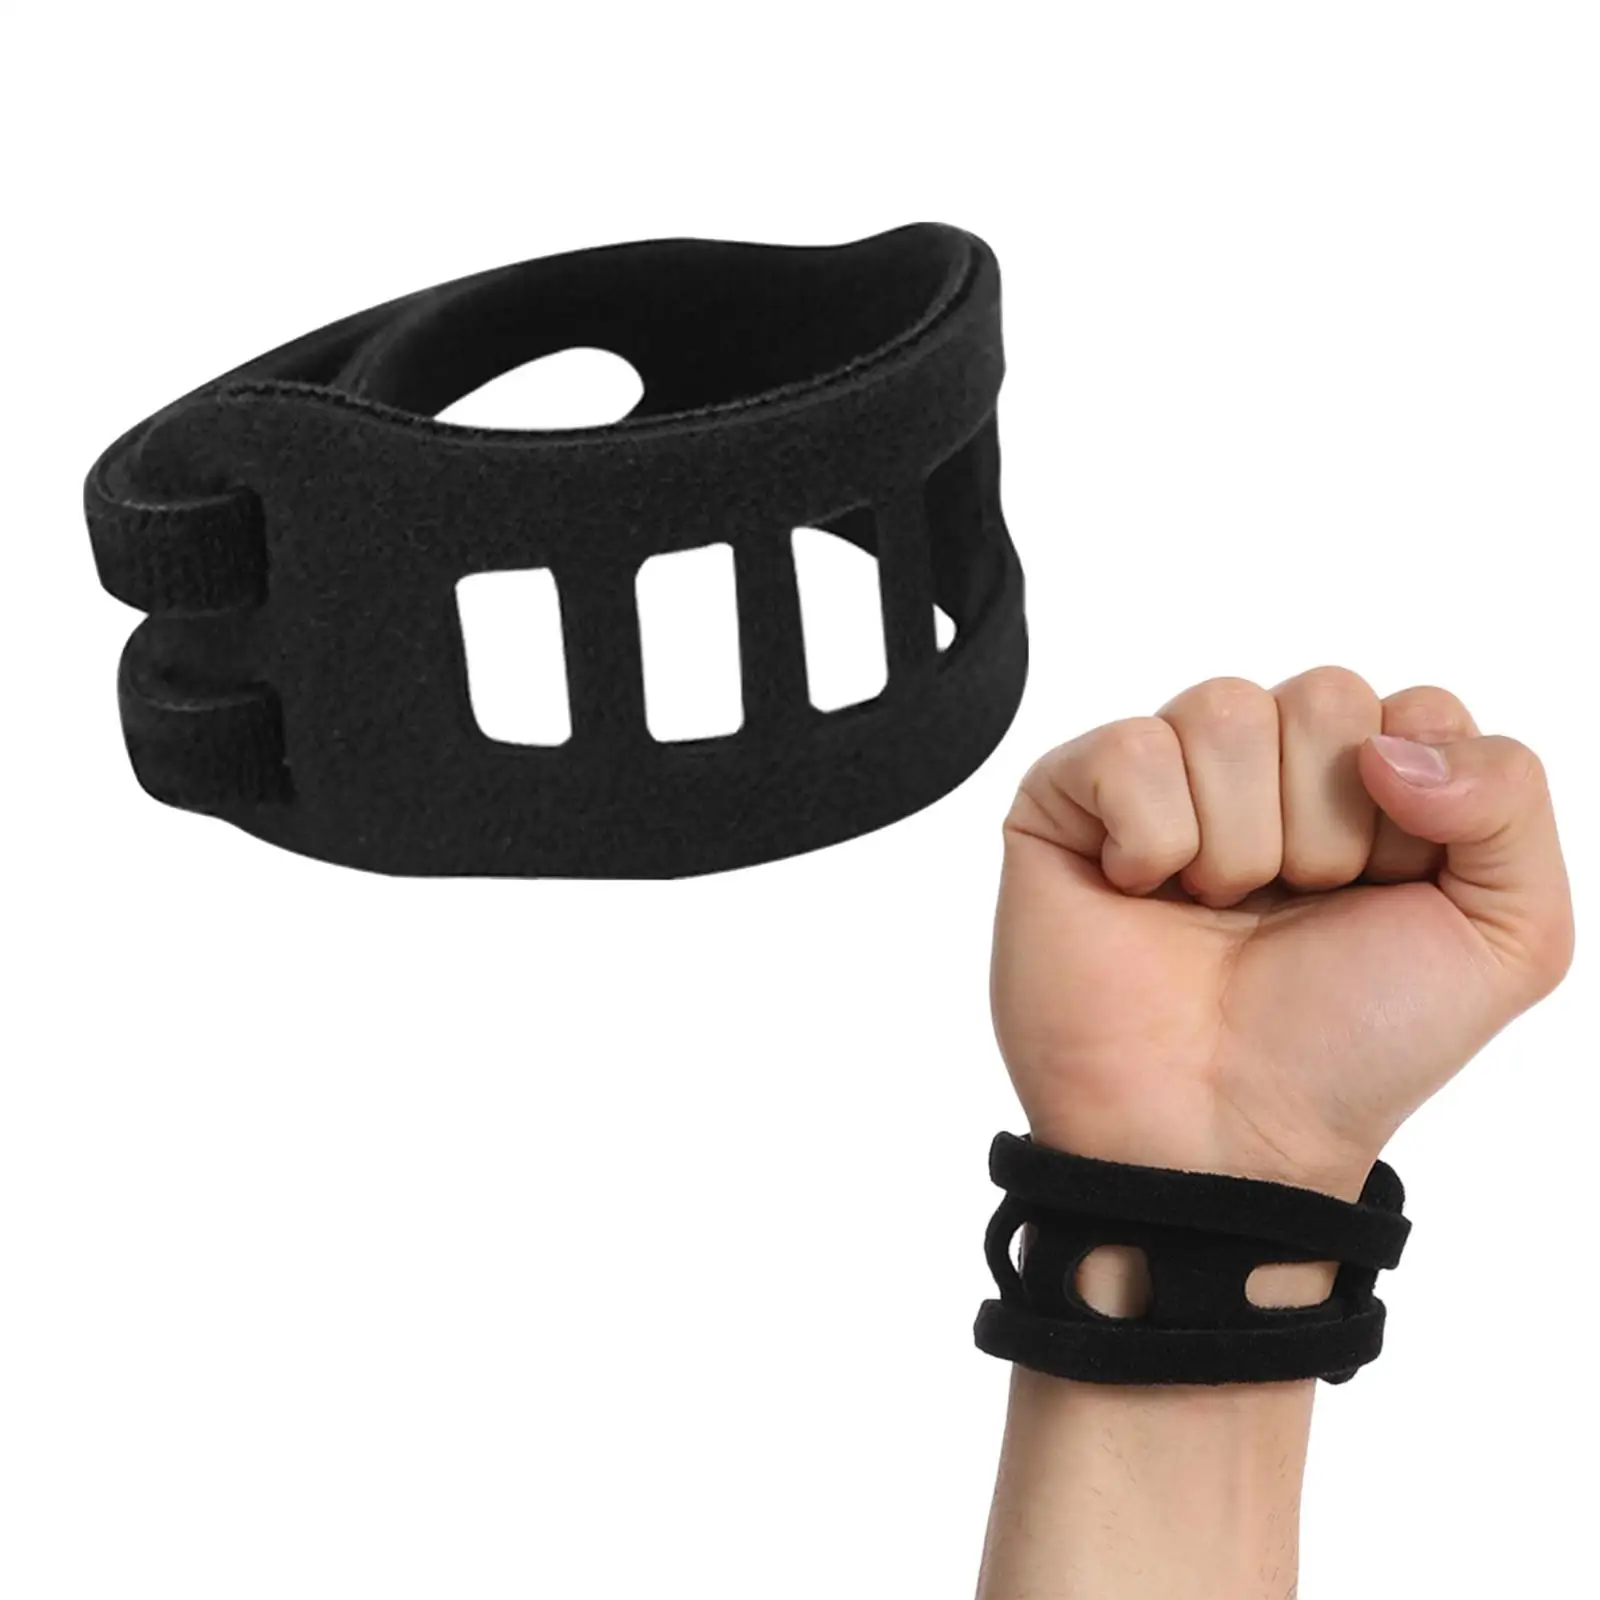 Tfcc Wrist Brace Ulnar Sided Wrist Pain Soft Wrist Band Support for Basketball Fitness Yoga Left and Right Hand Carpal Tunnel